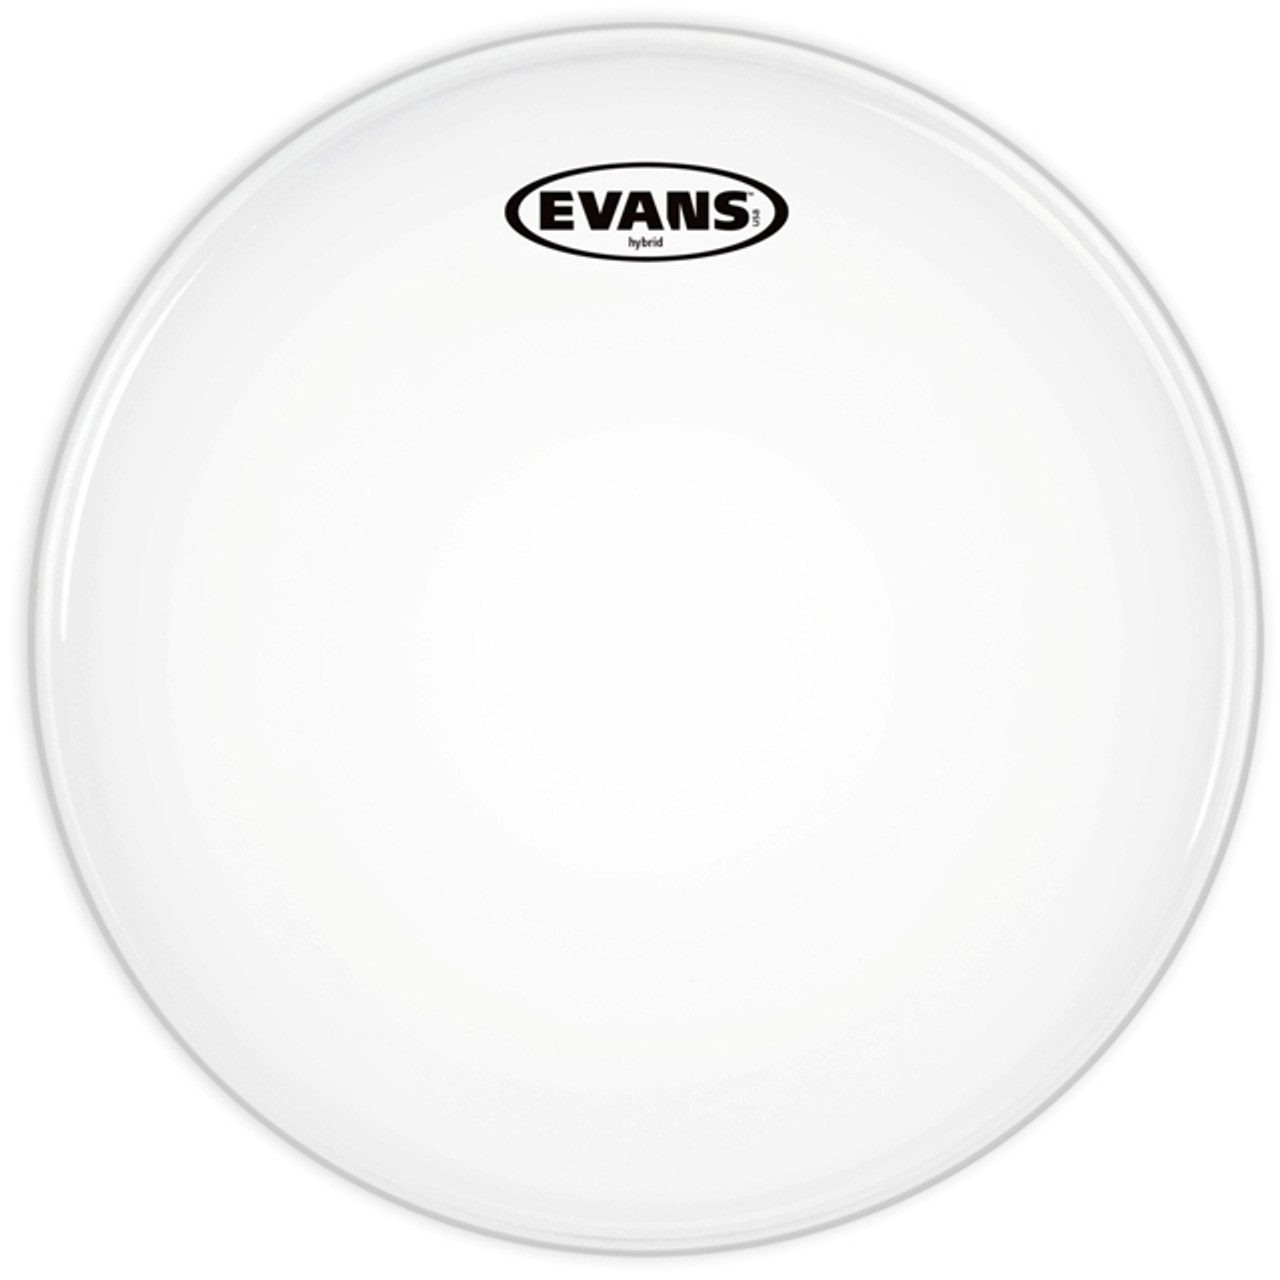 Evans Hybrid White Marching Snare Drum Head, 13 Inch